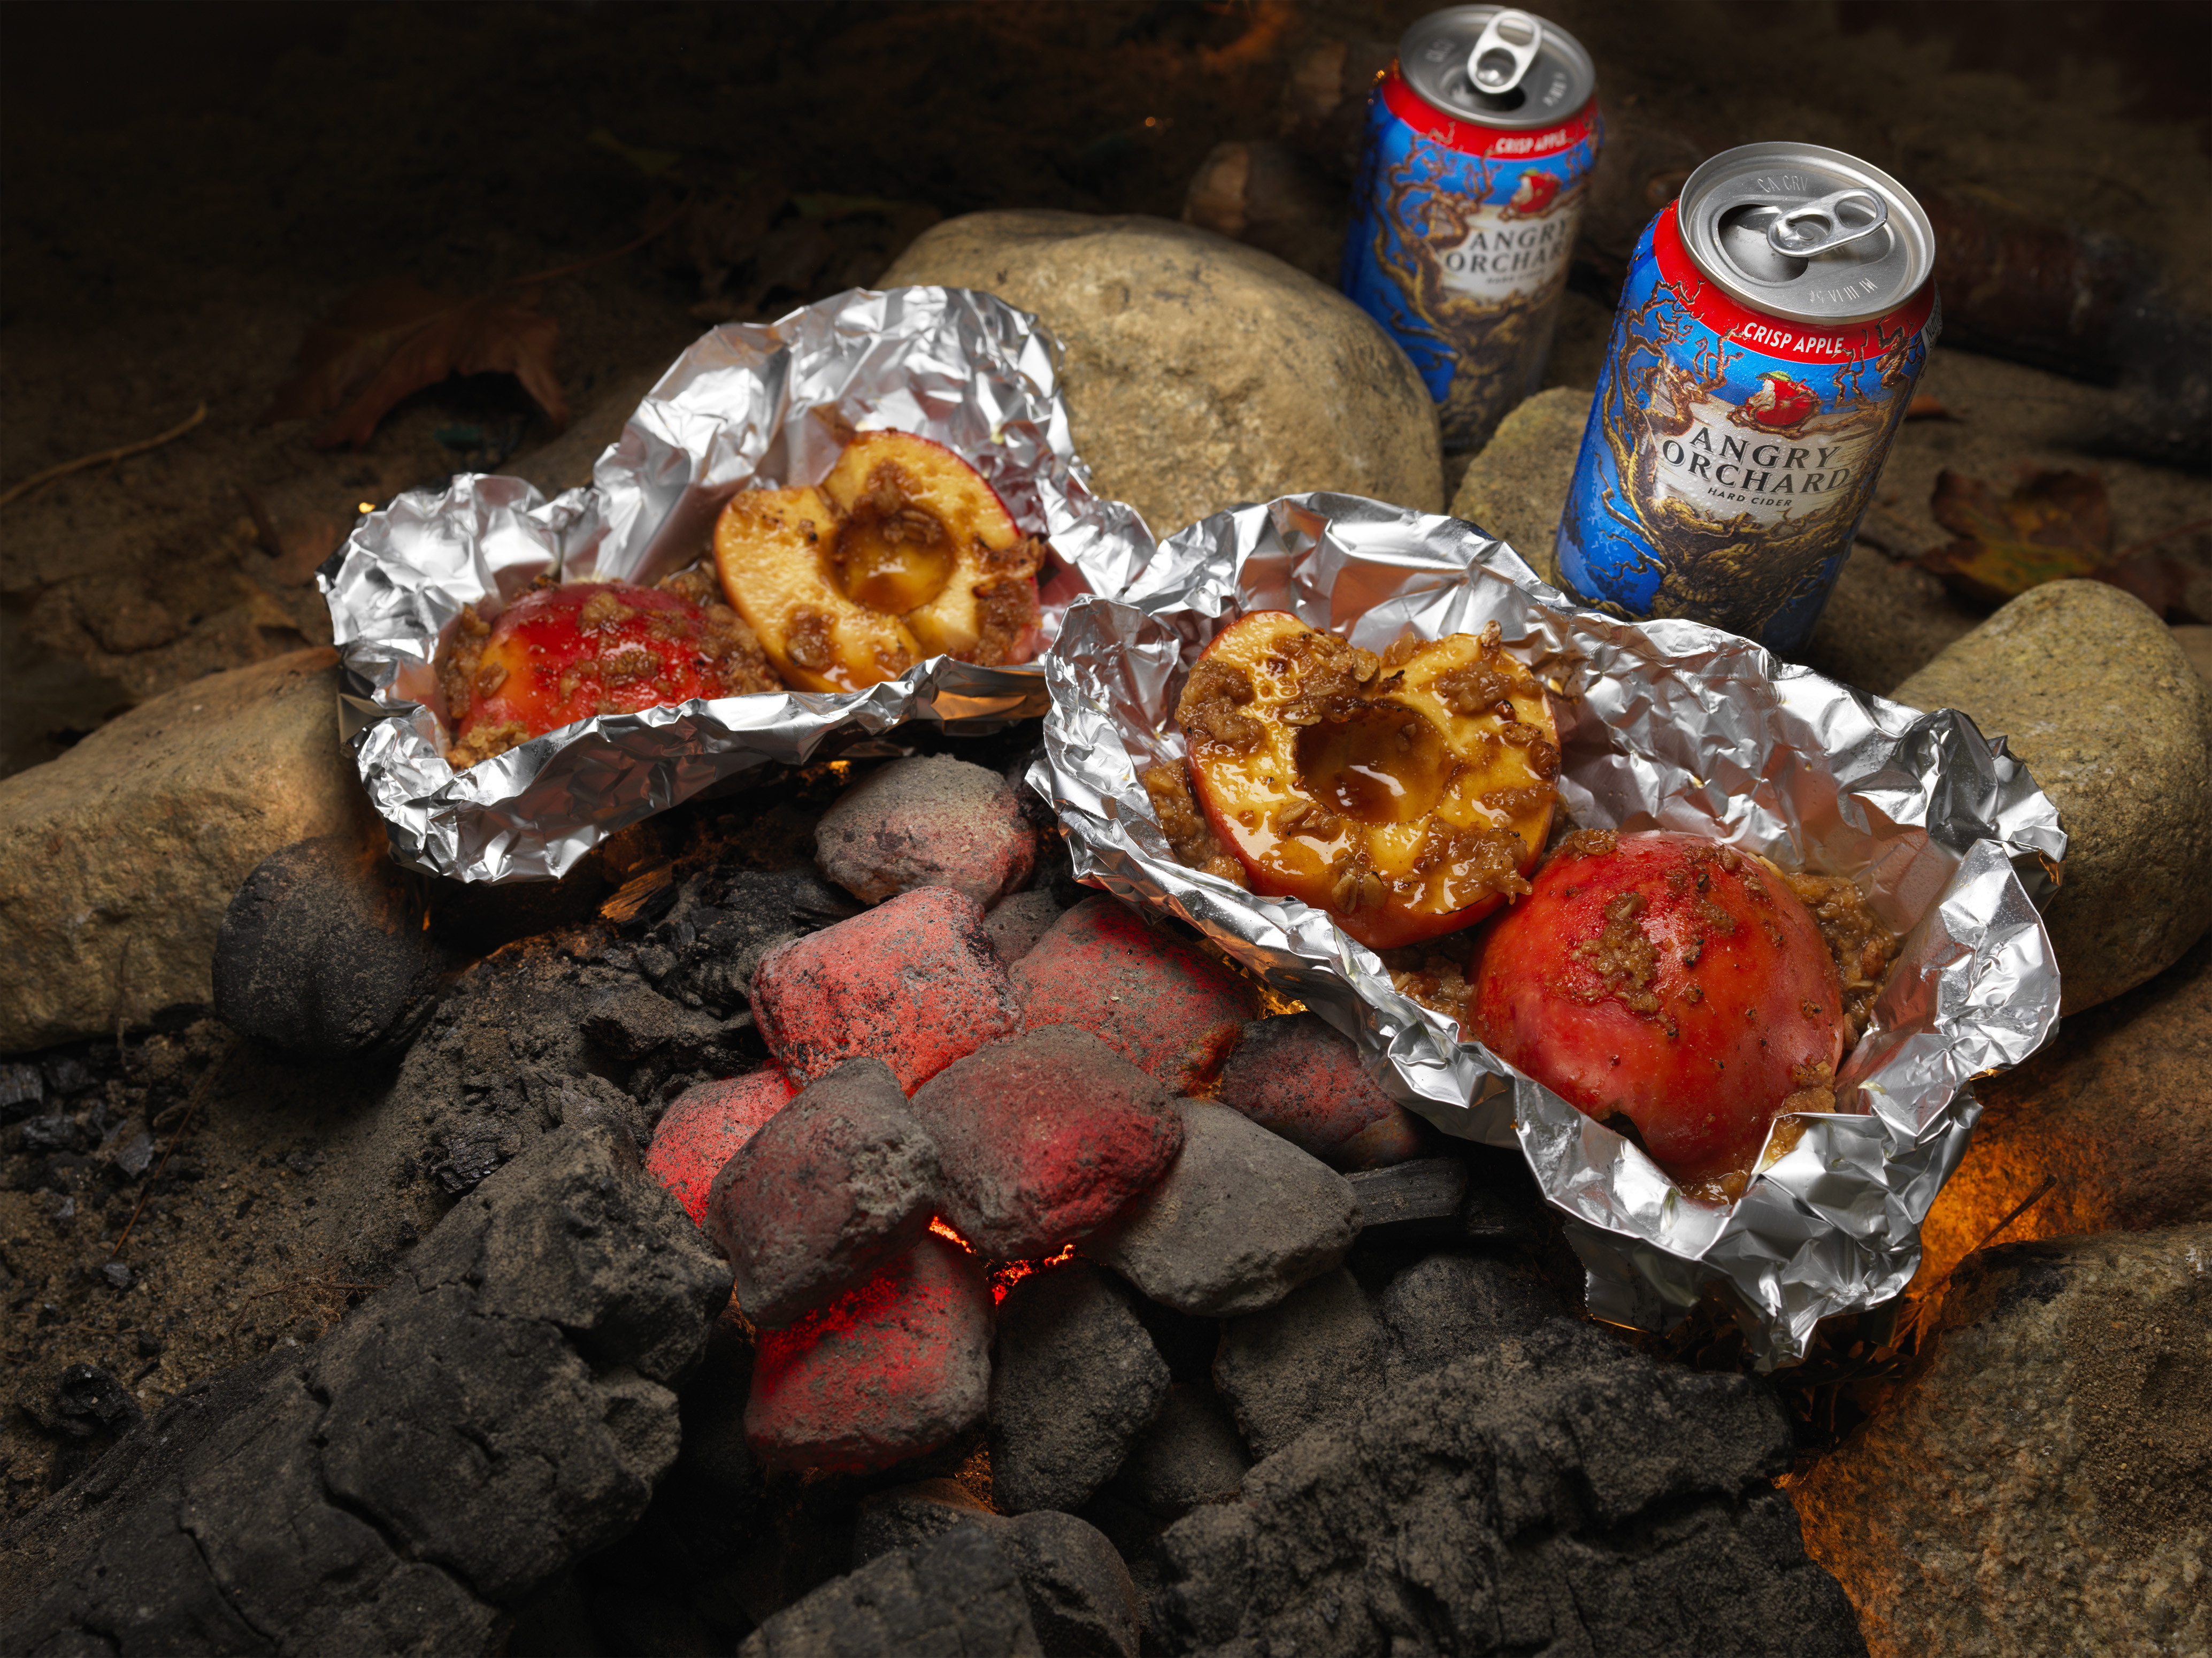 Angry Orchard’s – Campfire Angry Apples